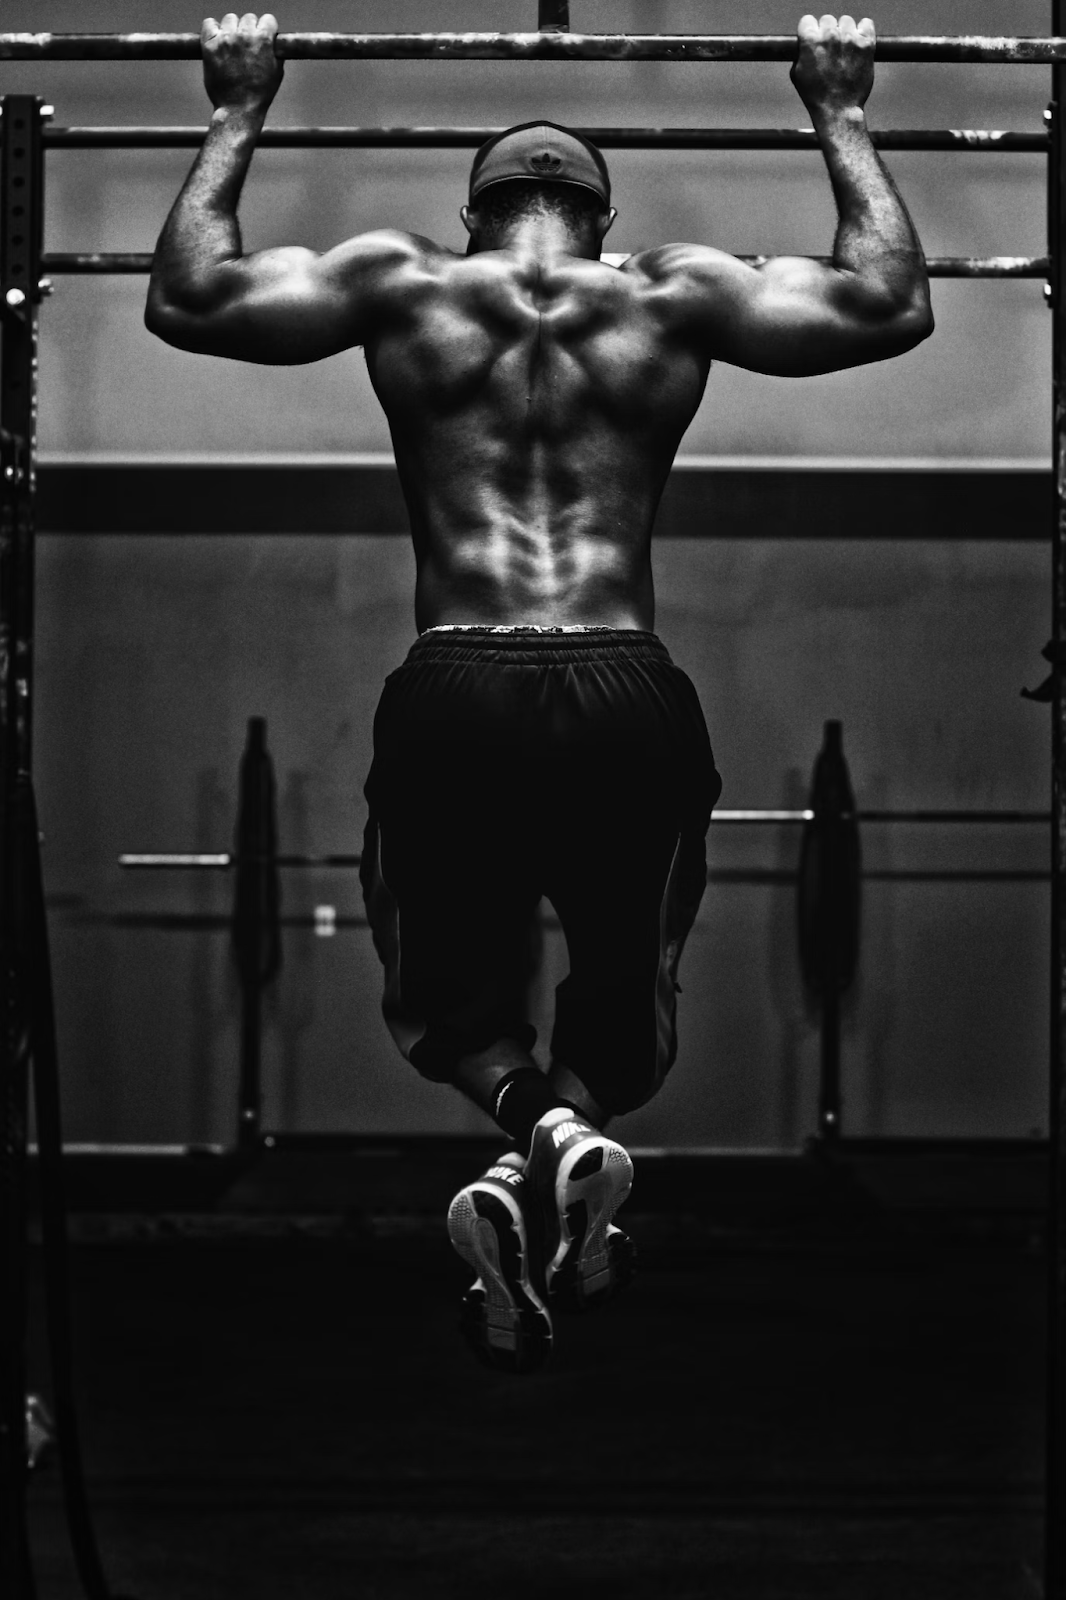 Bodybuilder's Grayscale Photo of Working Out